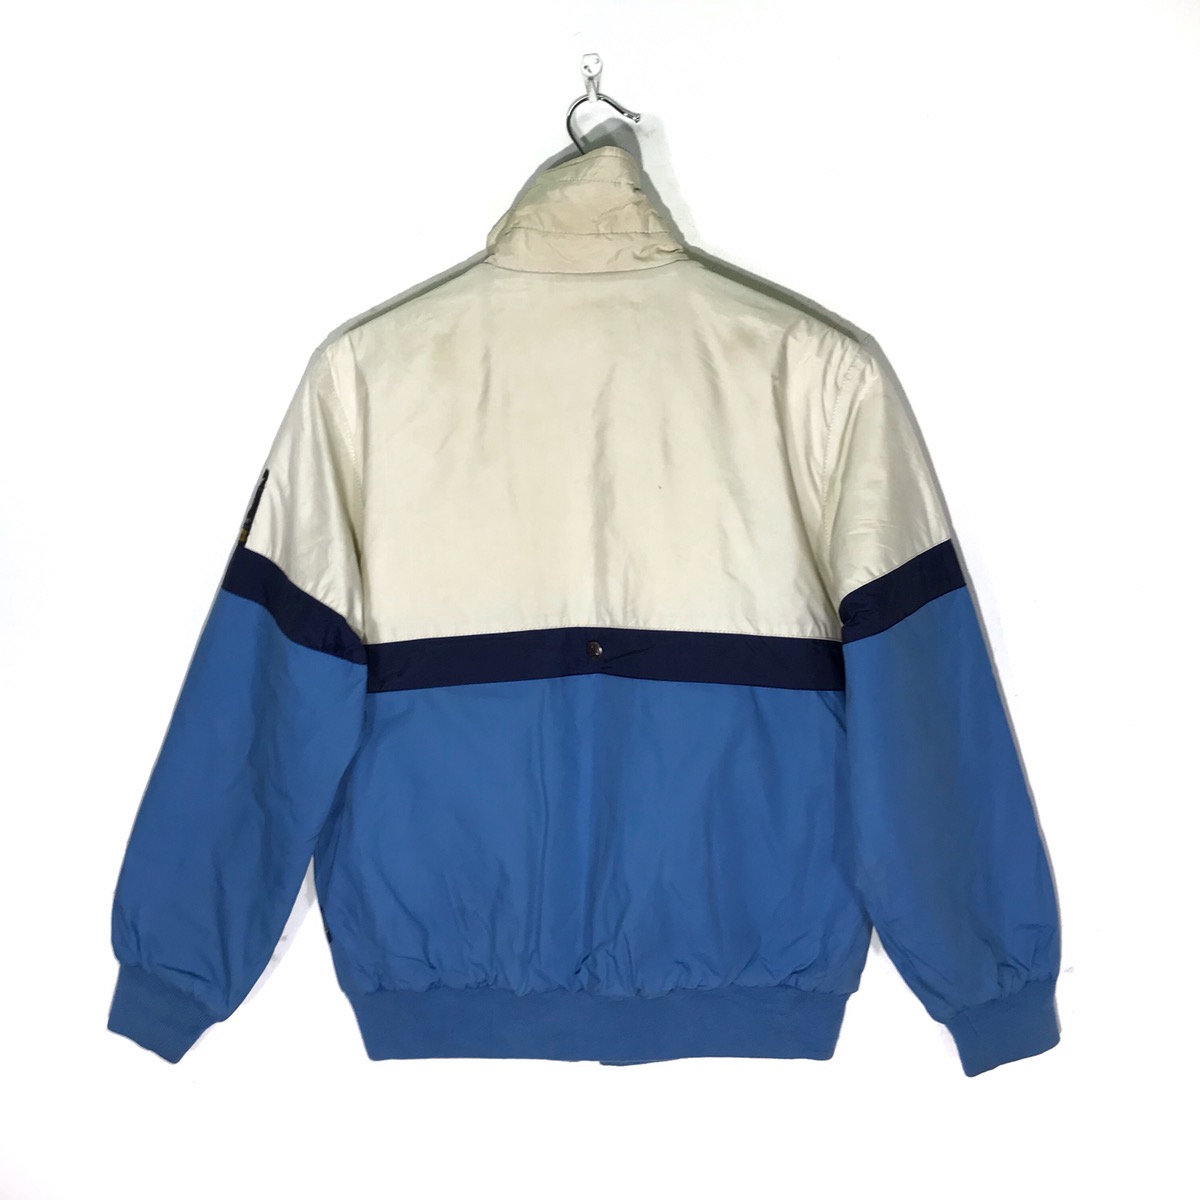 Made In Japan Vintage Killy Colorblock Ski Jacket by Asics - 2